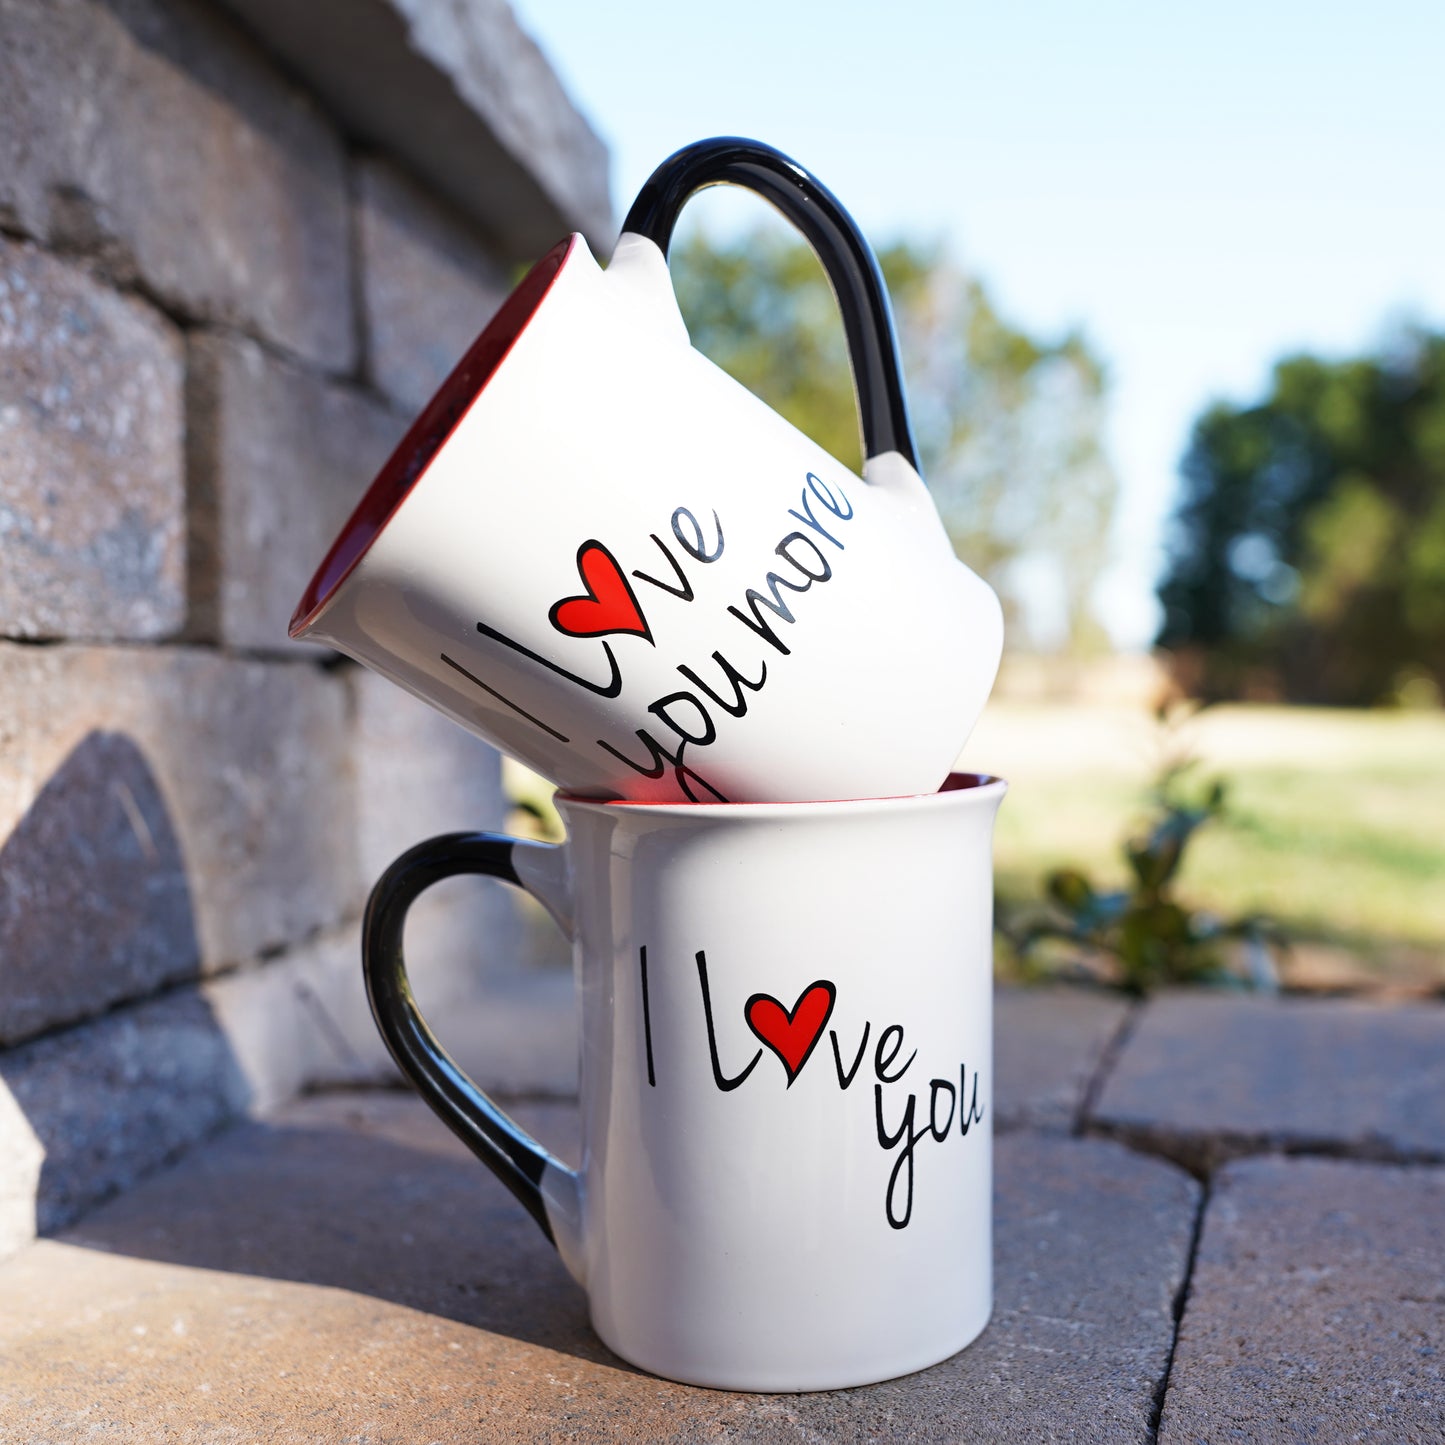 Cottage Creek I Love You, Love You More Coffee Mugs, Multicolored, Ceramic, 6" Set of Two Couples Mugs